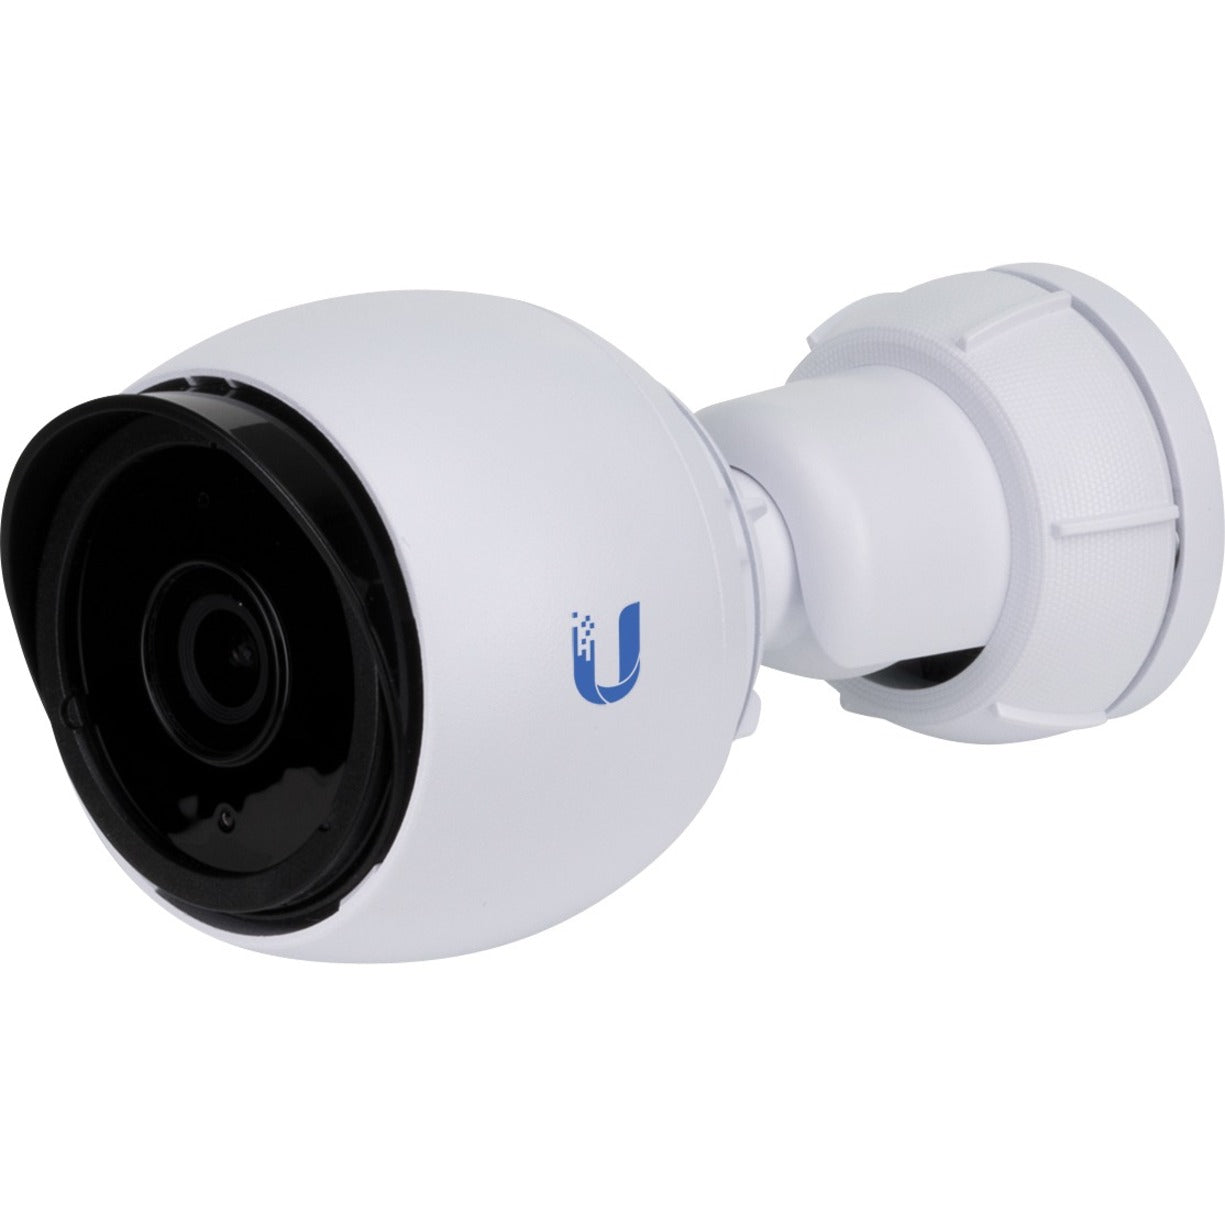 Ubiquiti UVC-G4-Bullet-3 UniFi Protect G4 4MP HD Network Camera, 3 Pack, Indoor/Outdoor, Built-in Microphone, Weather Proof